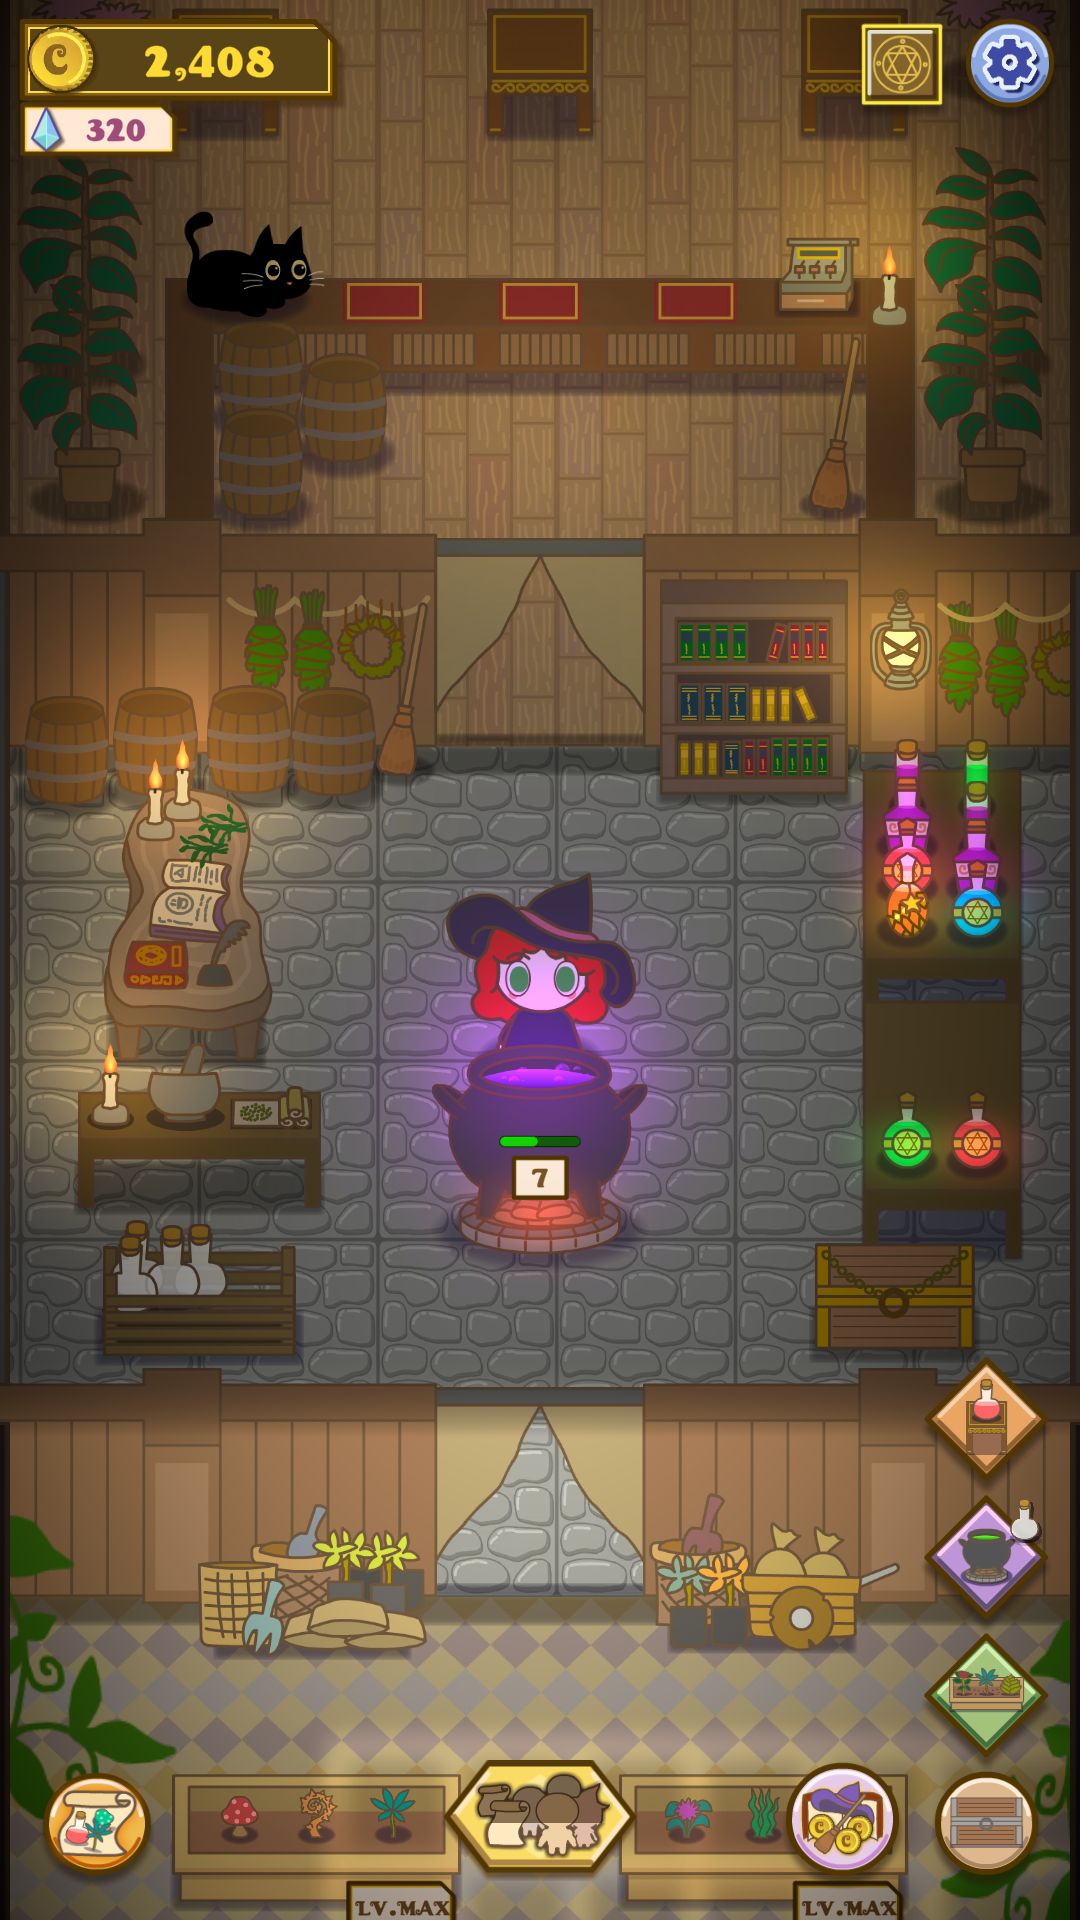 Witch Makes Potions - Android game screenshots.